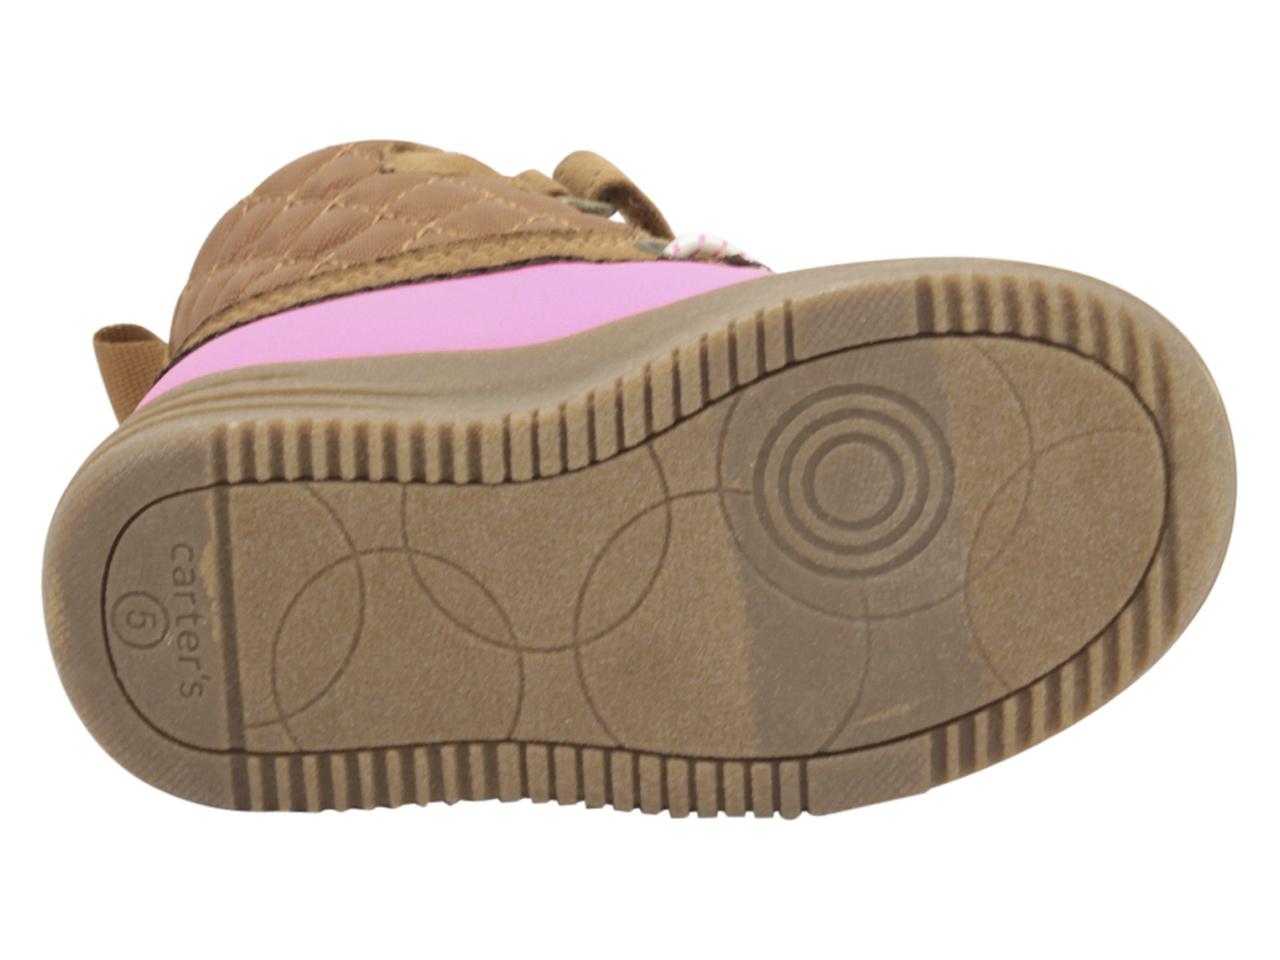 carters baby girl duck boots